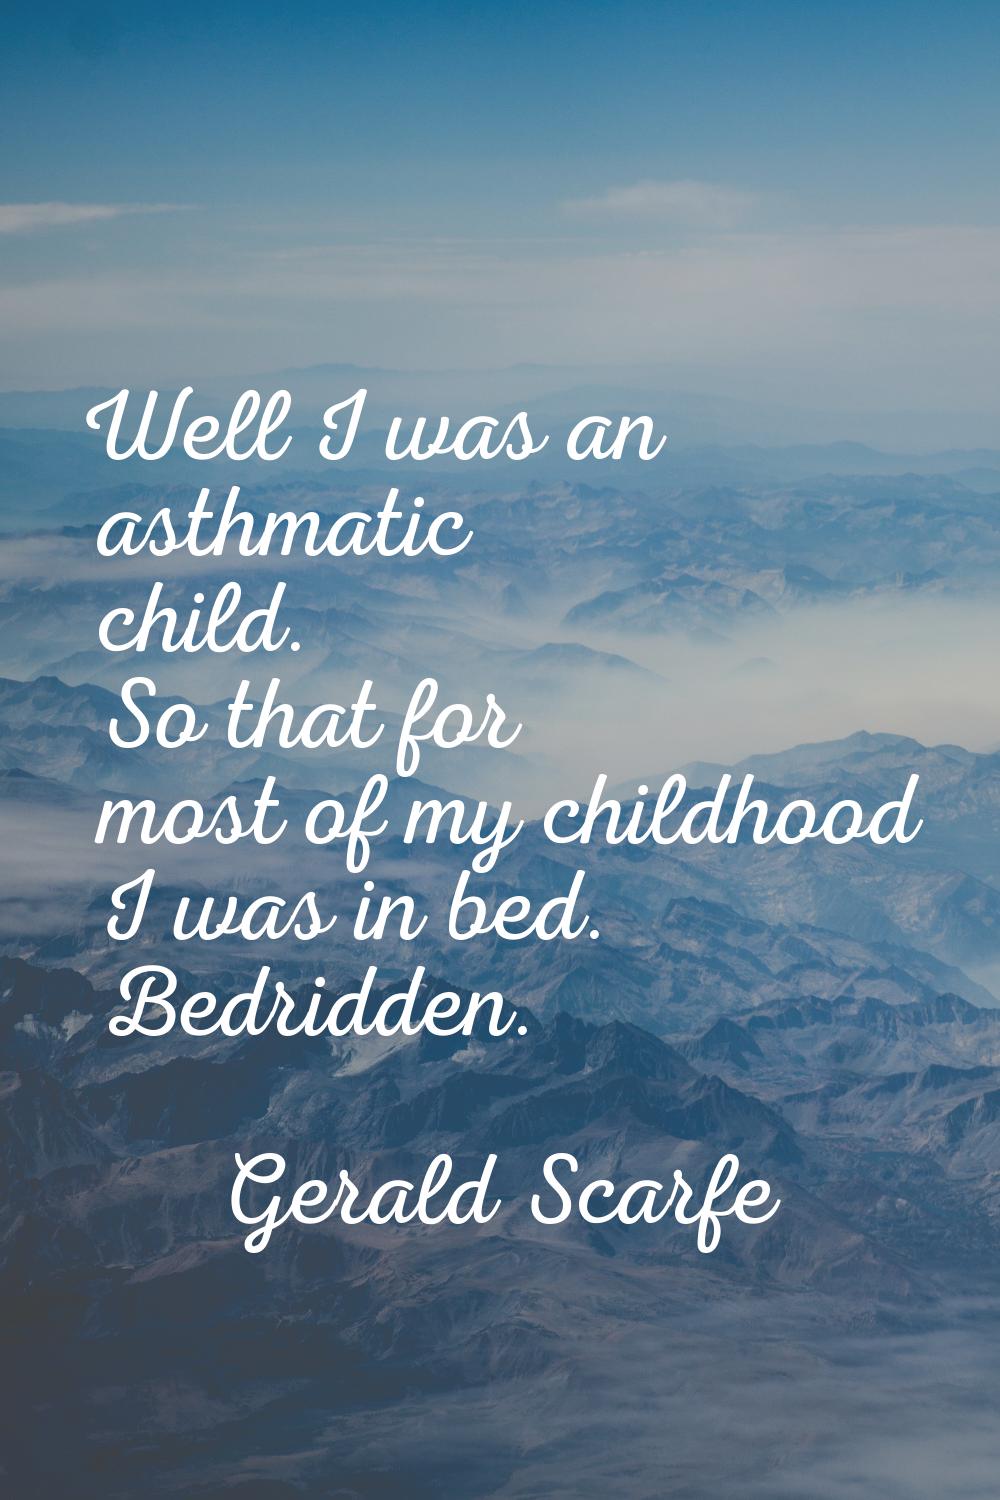 Well I was an asthmatic child. So that for most of my childhood I was in bed. Bedridden.